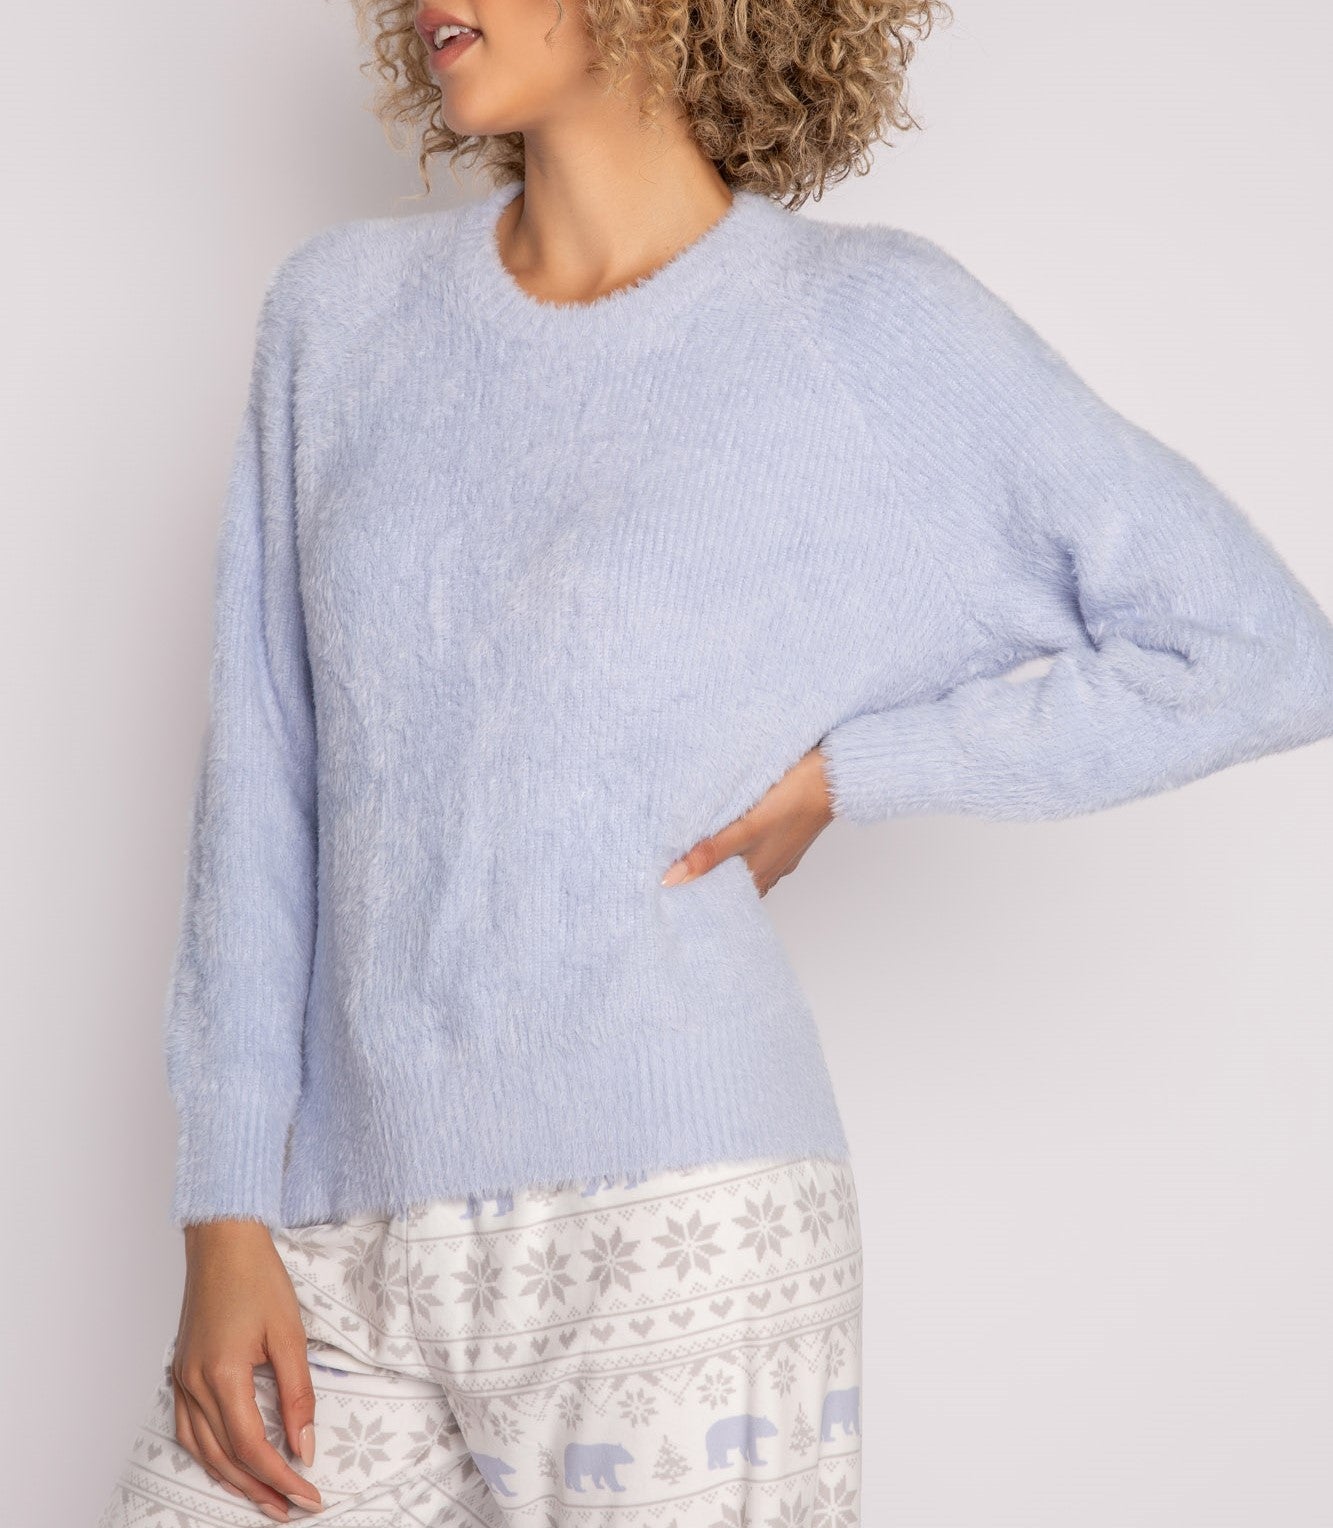 Feather Knit Banded Sleepwear Top In Blue Mist - PJ Salvage